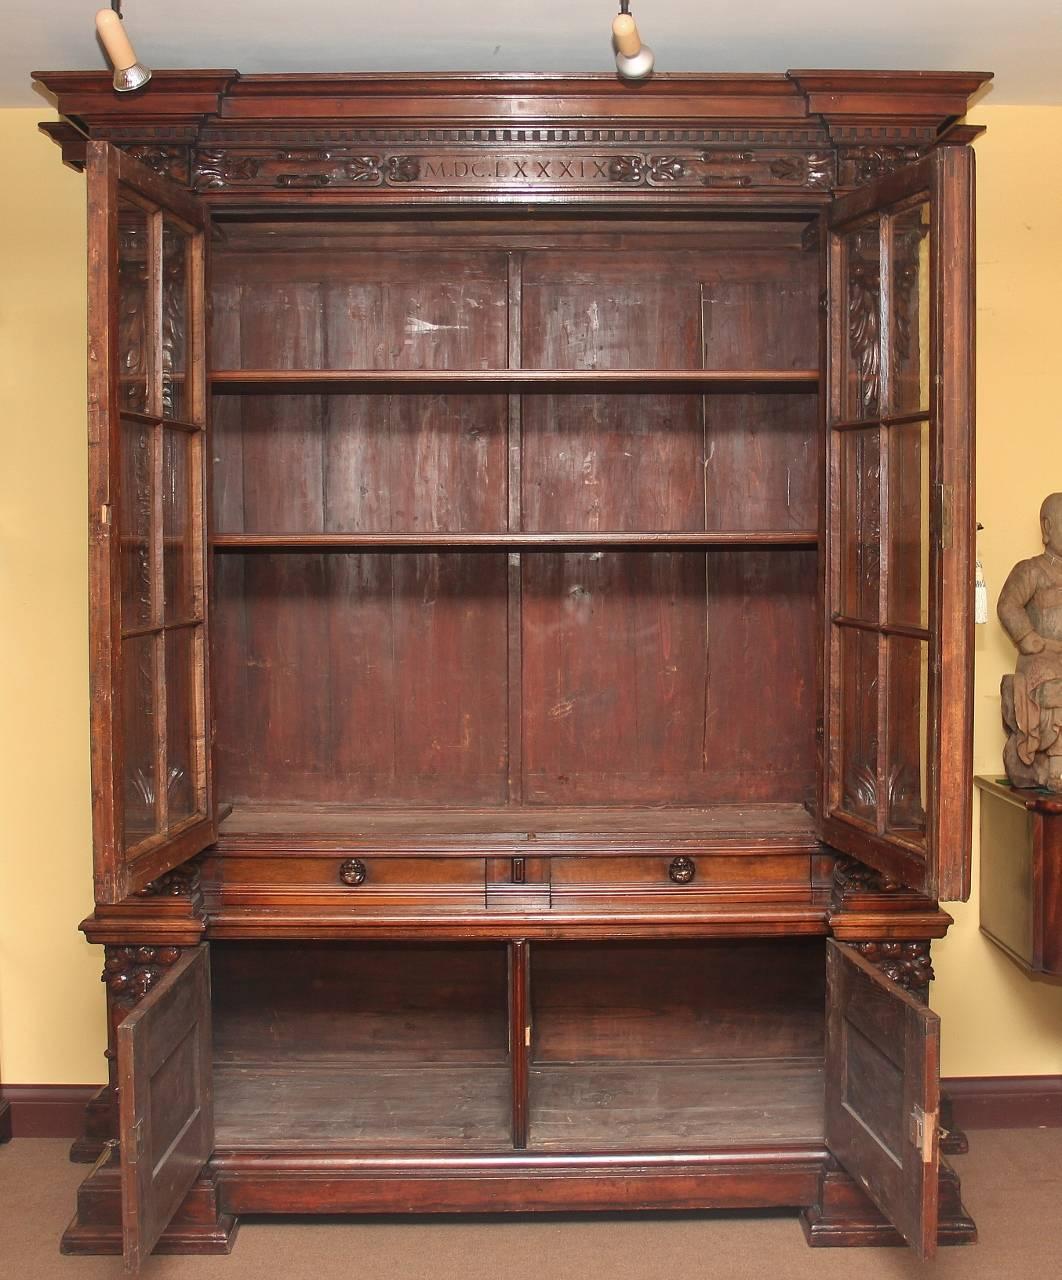 A large highly carved 19th century Italian walnut bookcase or cabinet, the moulded cornice above a carved frieze, with two large glazed doors opening to reveal two shelves inside, the doors flanked by carved scrolls, the lower section having four